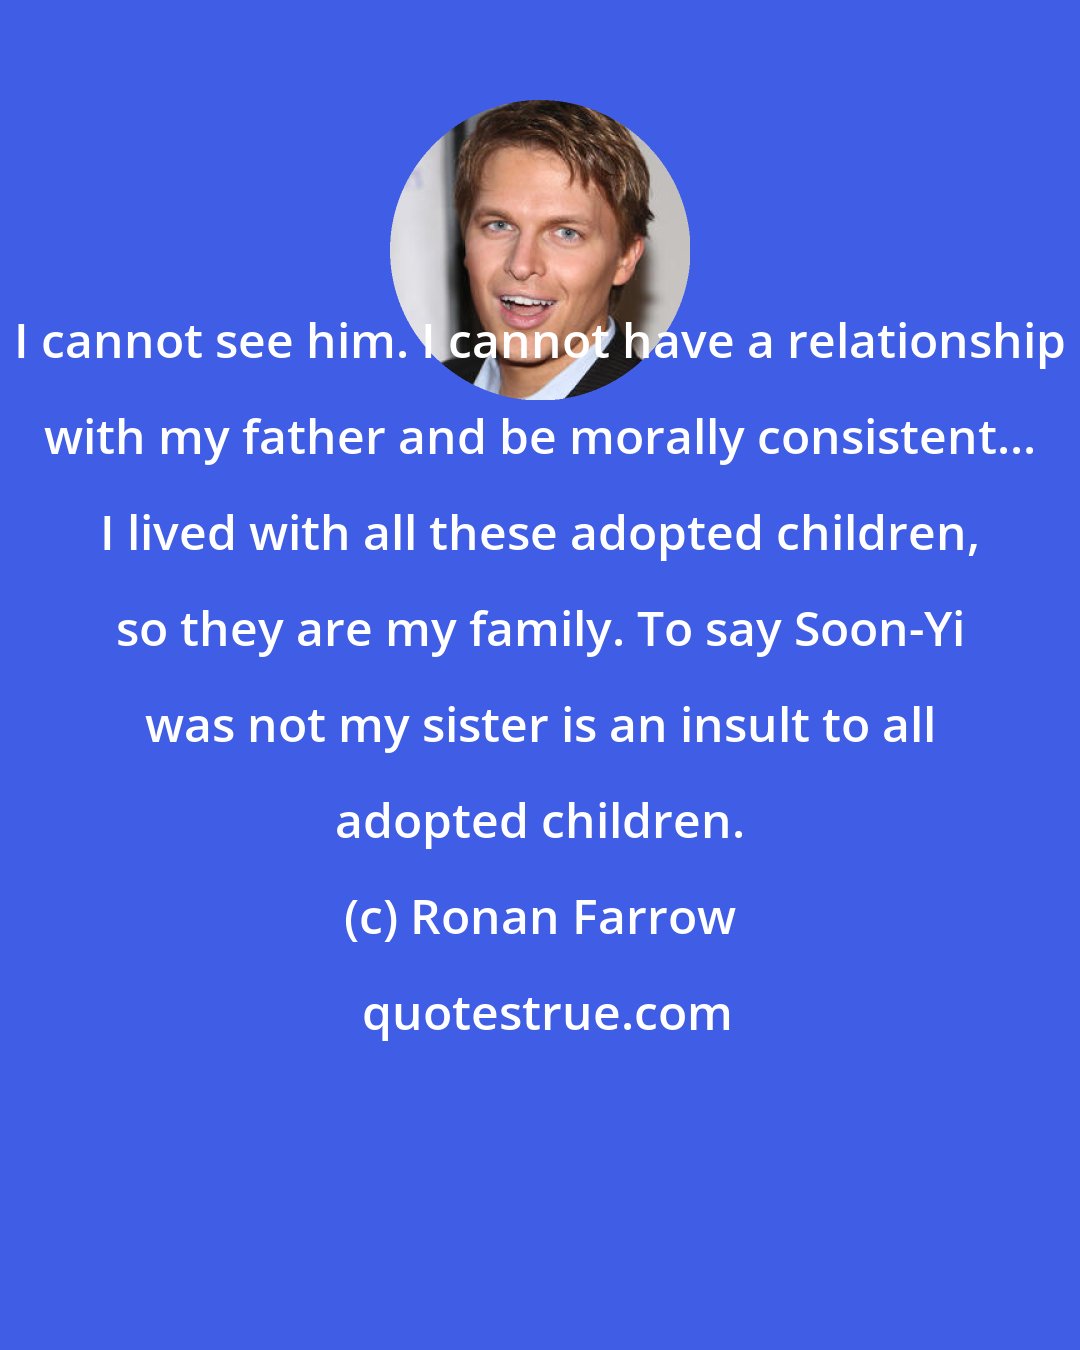 Ronan Farrow: I cannot see him. I cannot have a relationship with my father and be morally consistent... I lived with all these adopted children, so they are my family. To say Soon-Yi was not my sister is an insult to all adopted children.